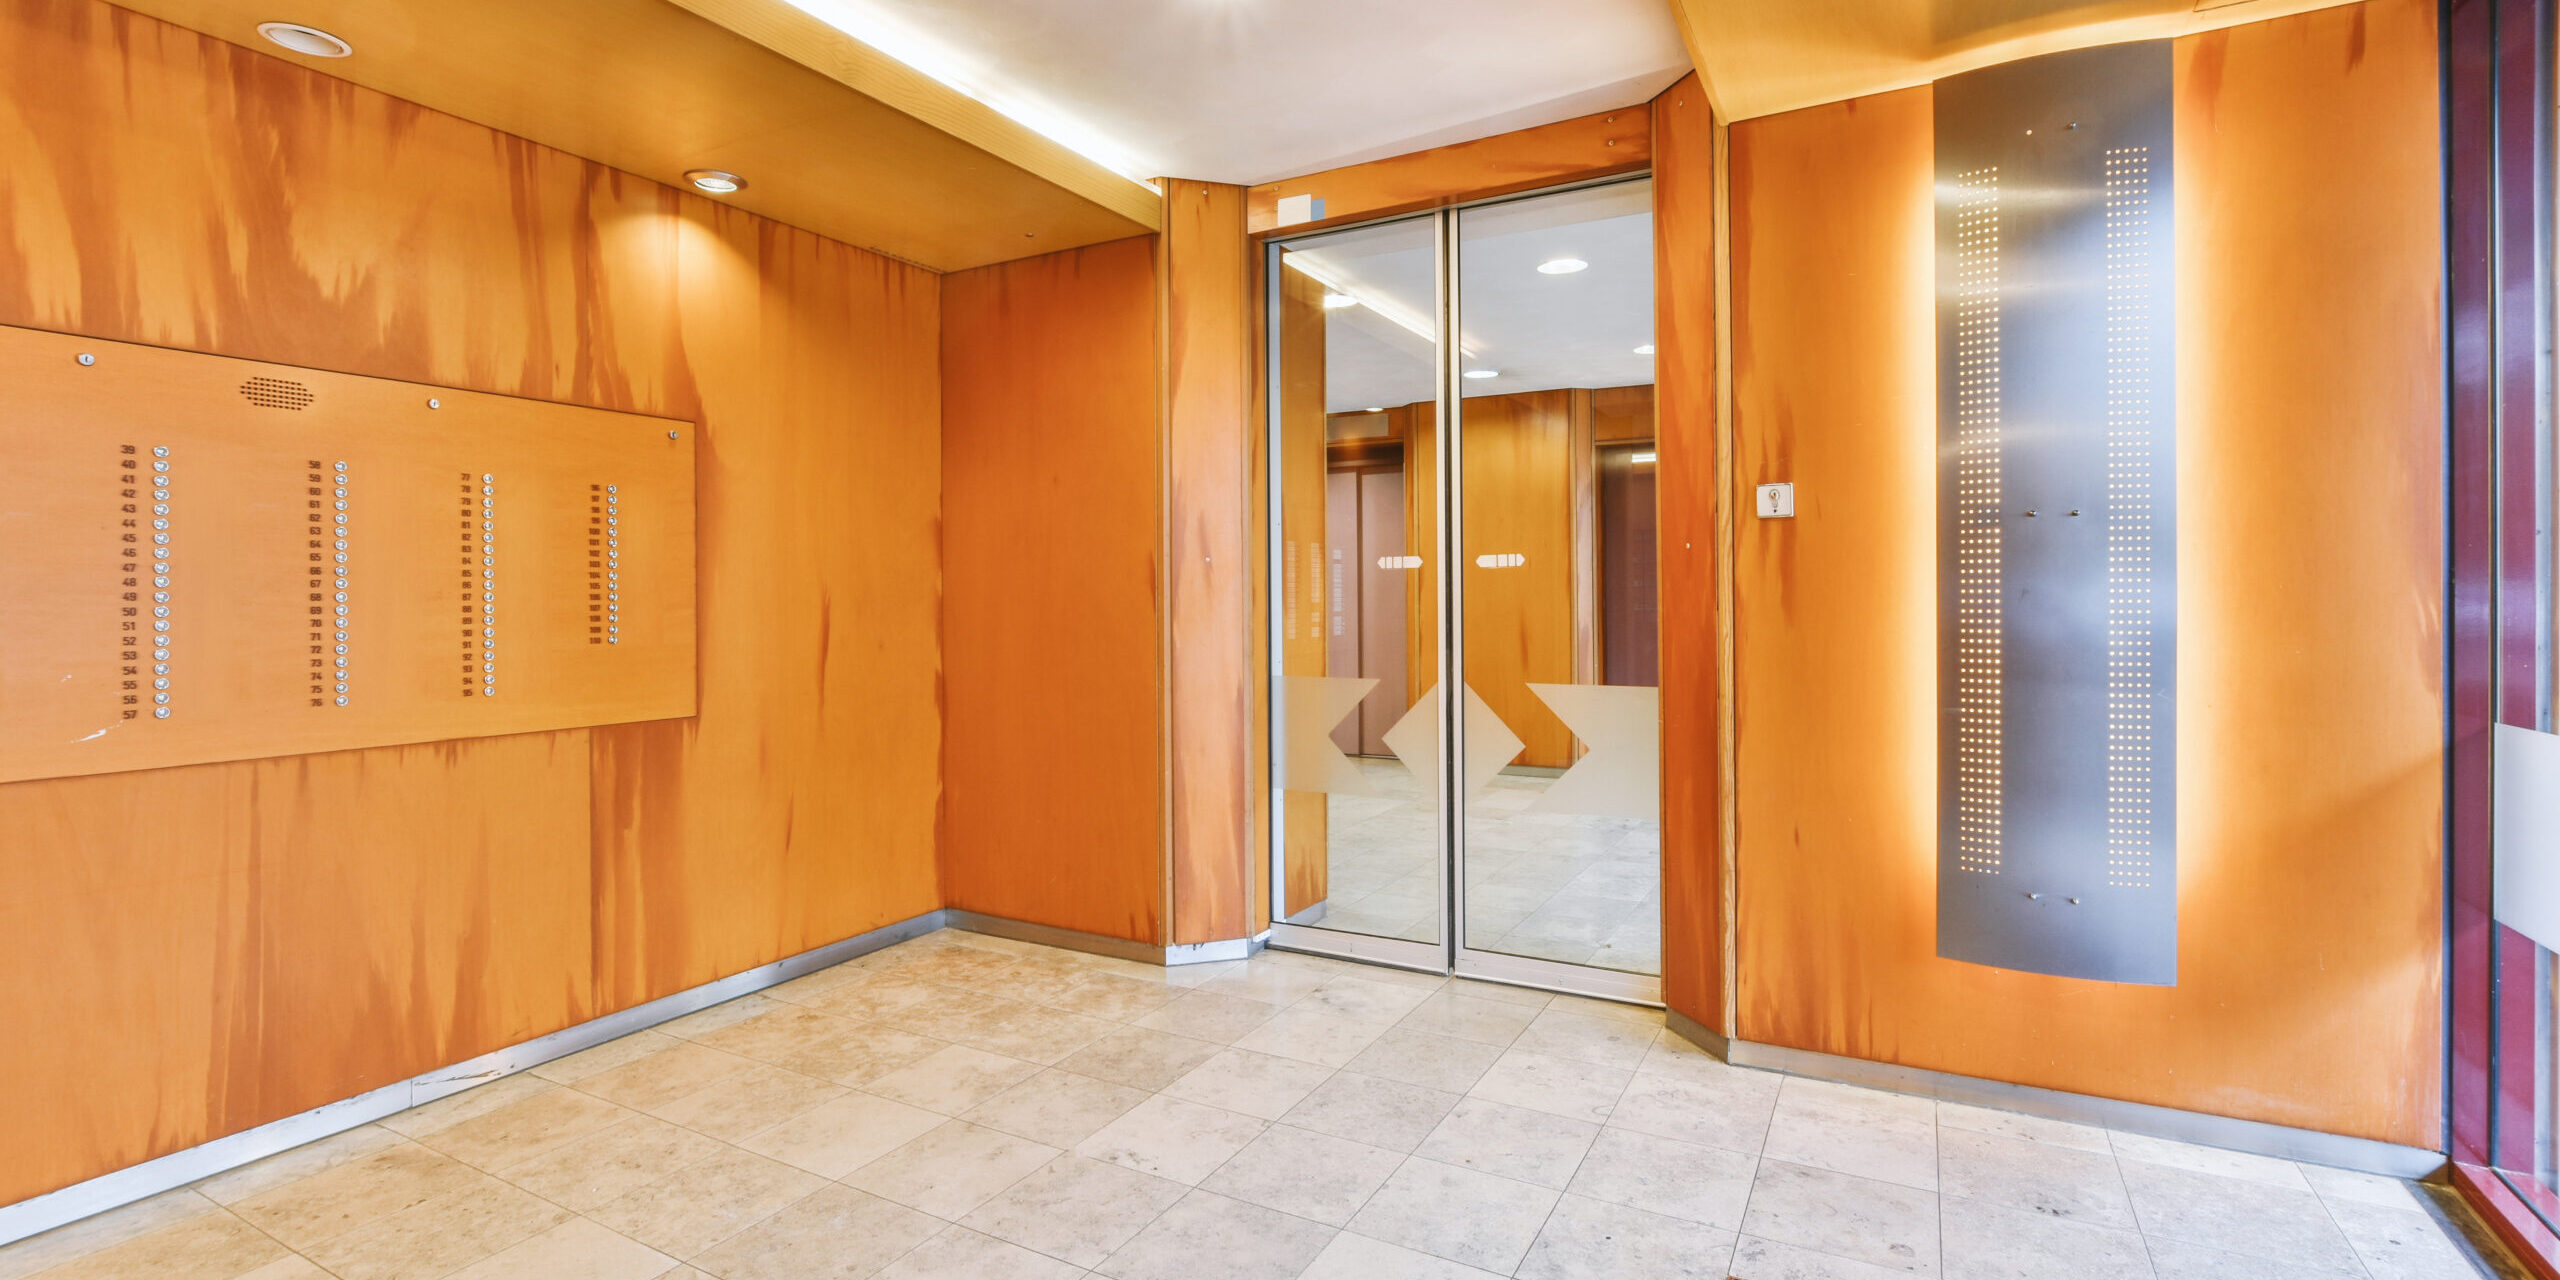 Shiny elevator with opened door located in illuminated hall of contemporary apartment building with tiled floor